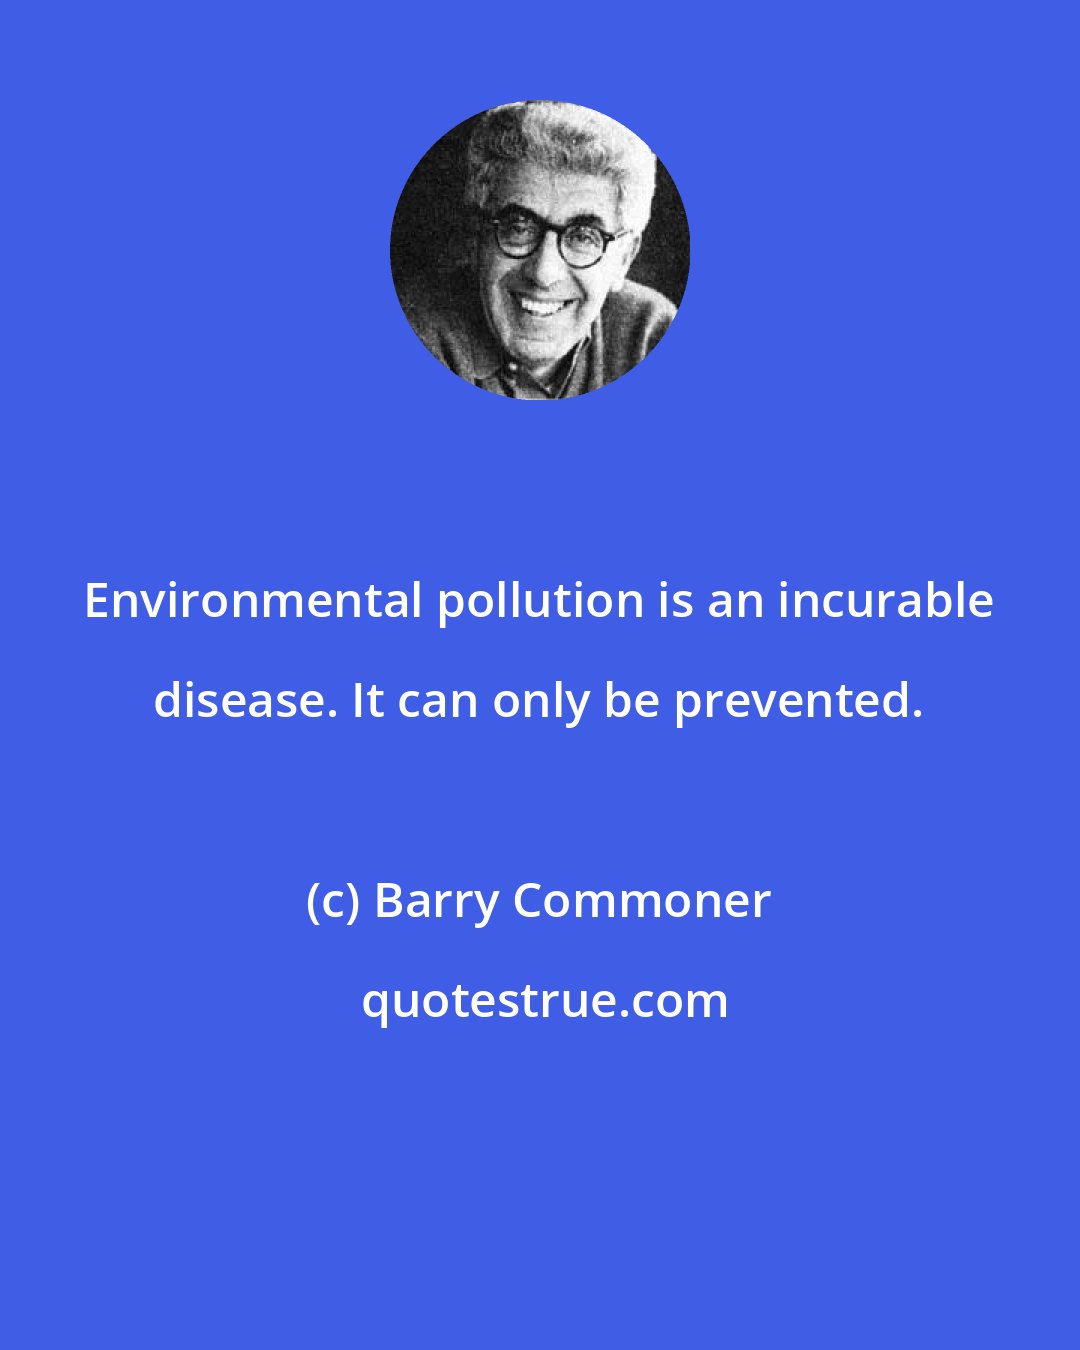 Barry Commoner: Environmental pollution is an incurable disease. It can only be prevented.